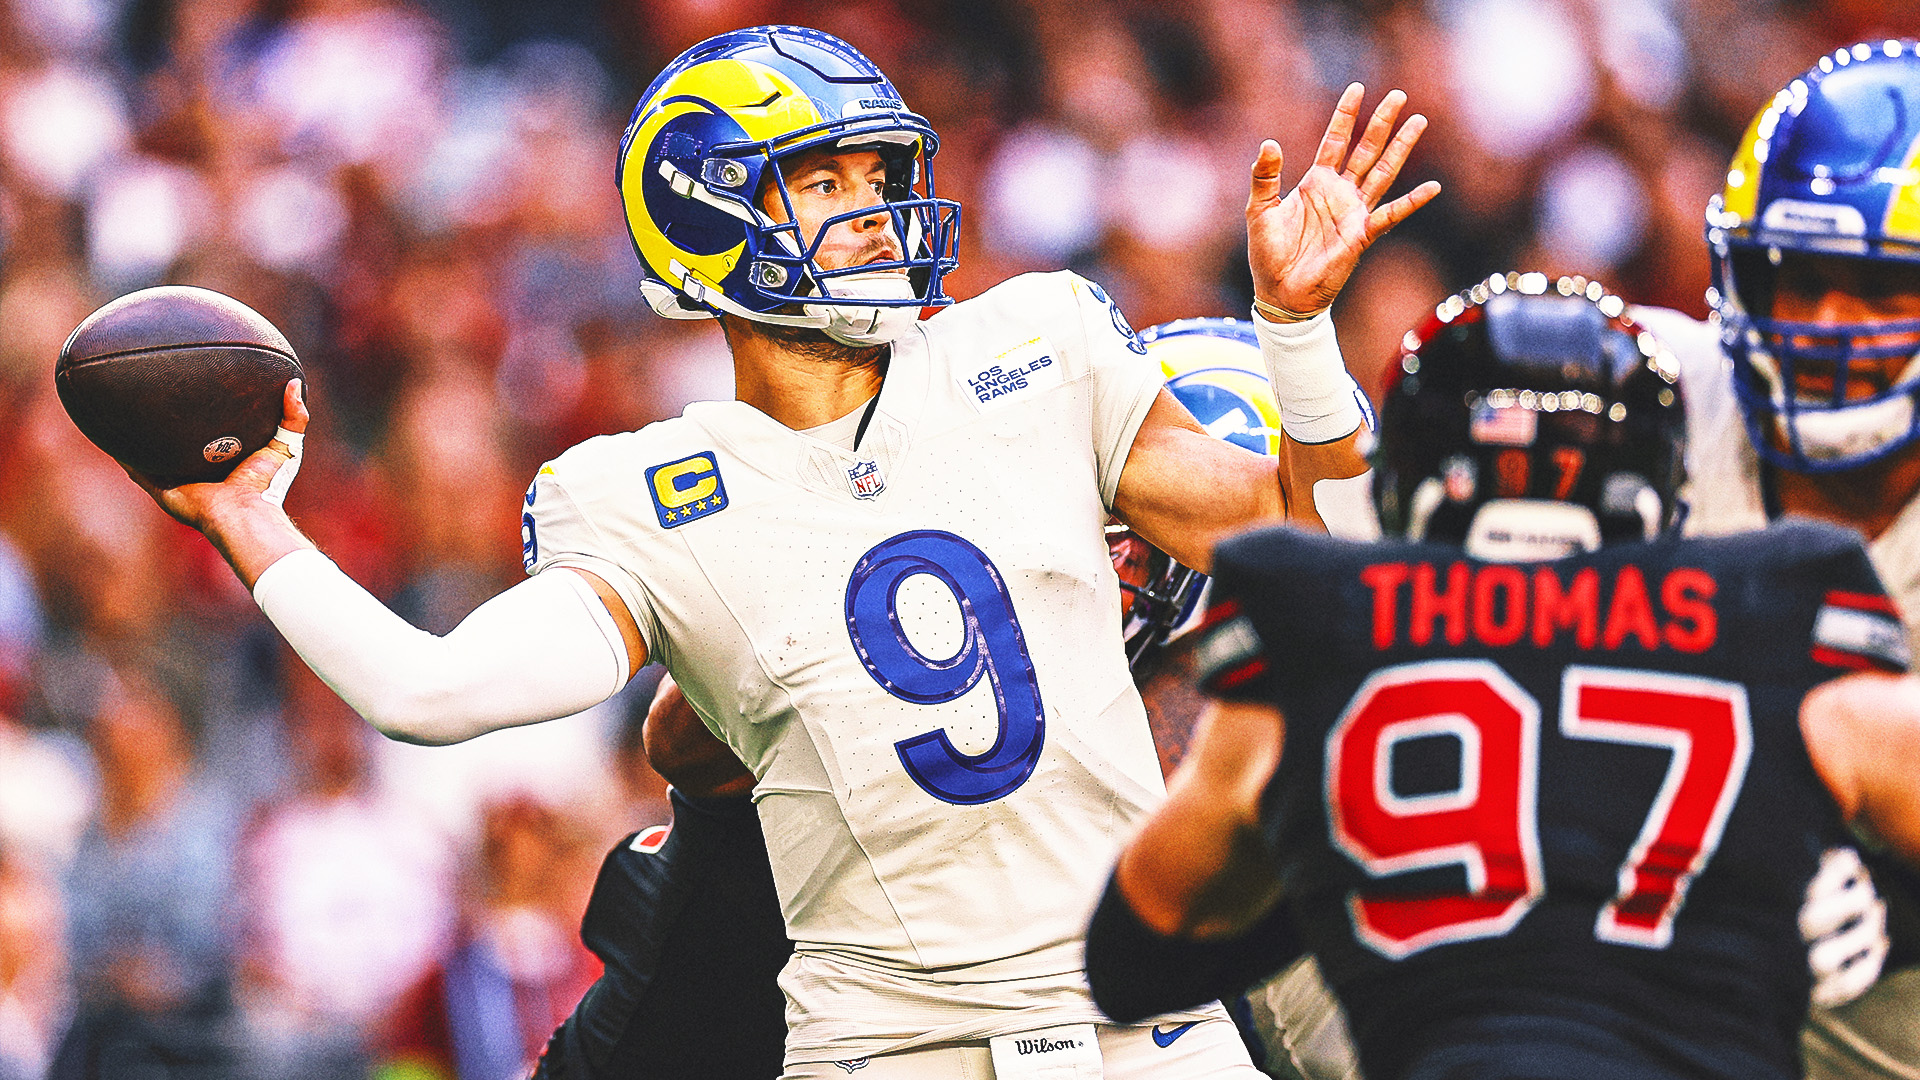 Matthew Stafford throws season-high 4 TDs as Rams roll to 37-14 win over Cardinals